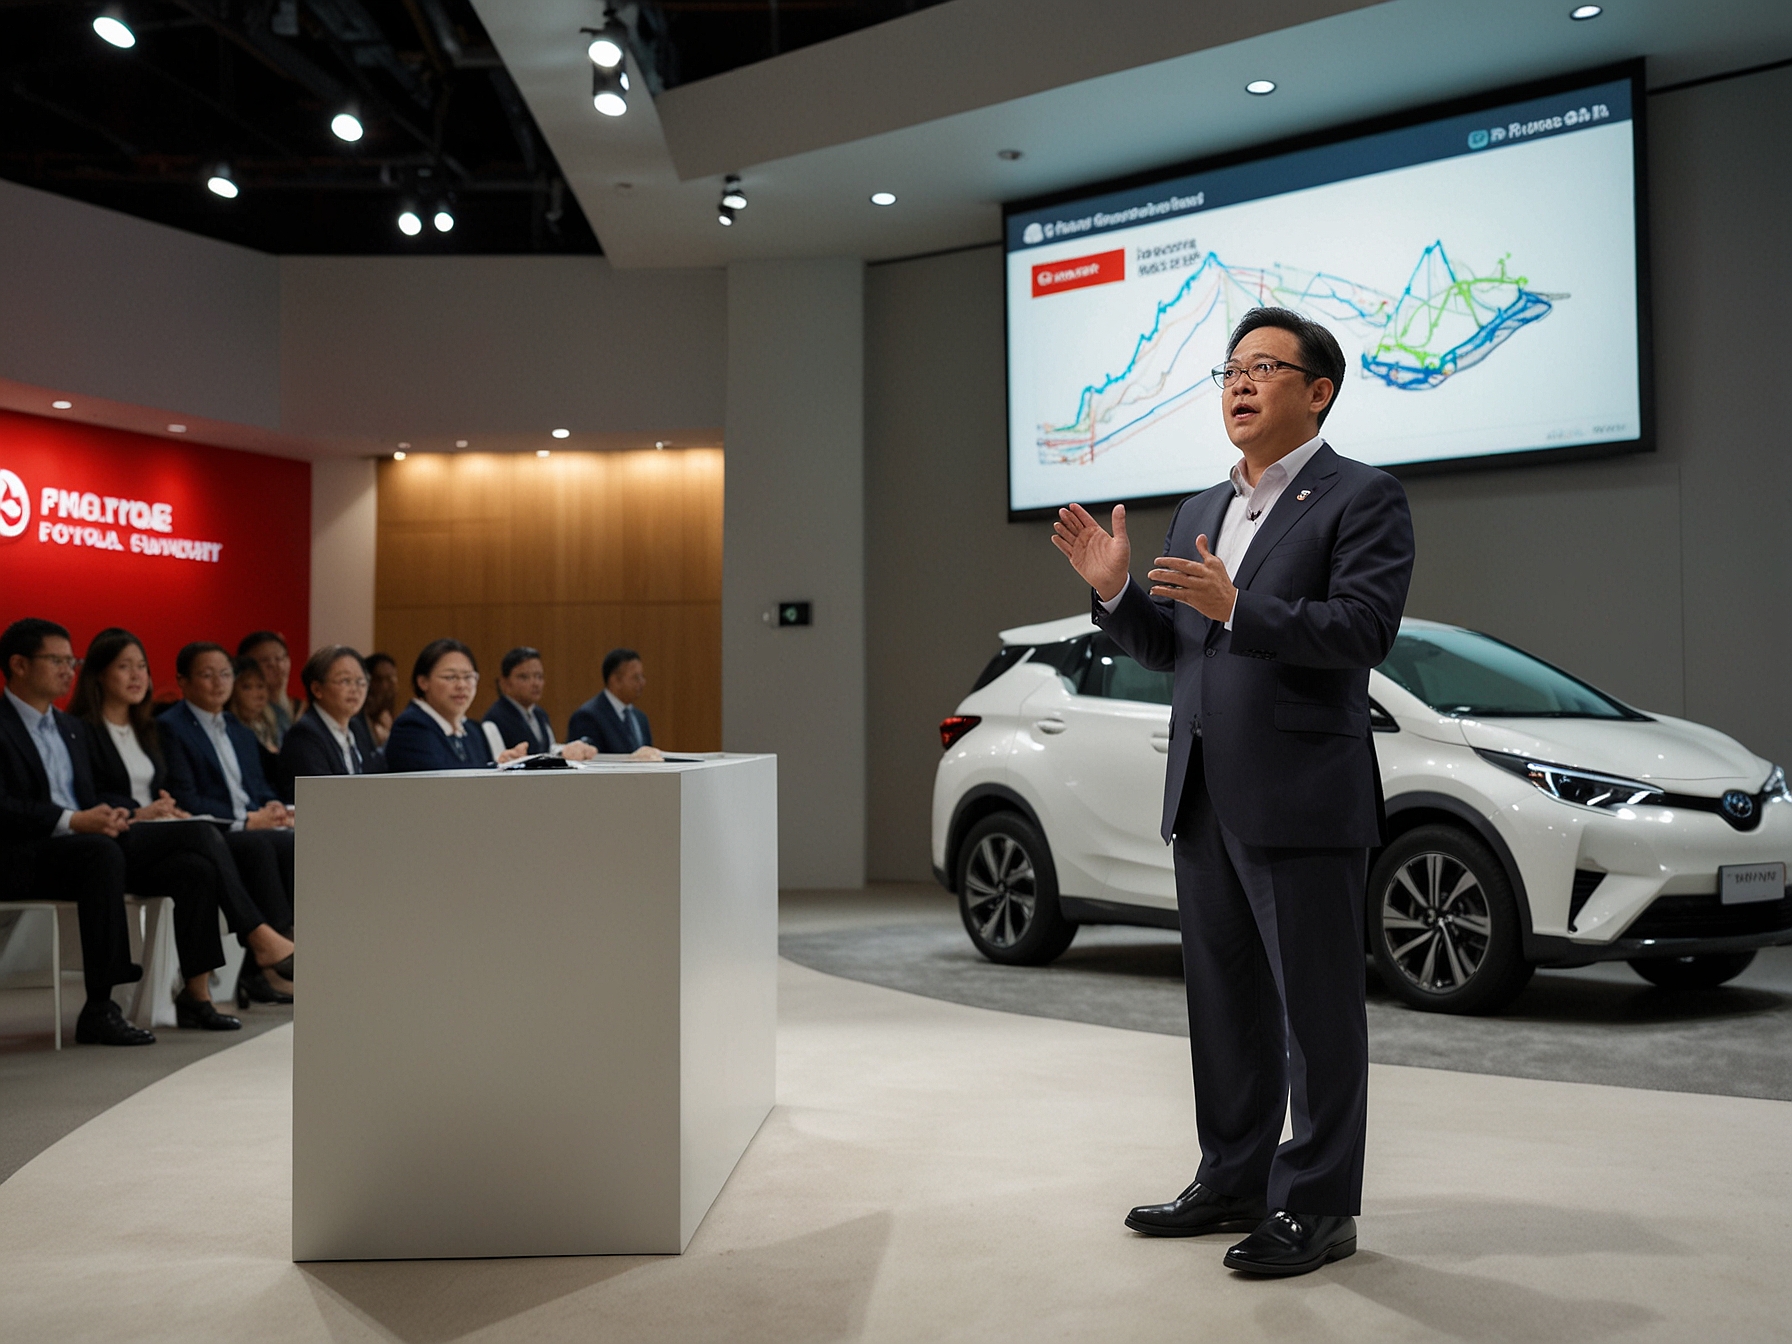 Toyota's CEO, Akio Toyoda, addressing shareholders at the AGM, with a presentation slide highlighting the company’s strategy for electric vehicle adoption and hybrid technologies.